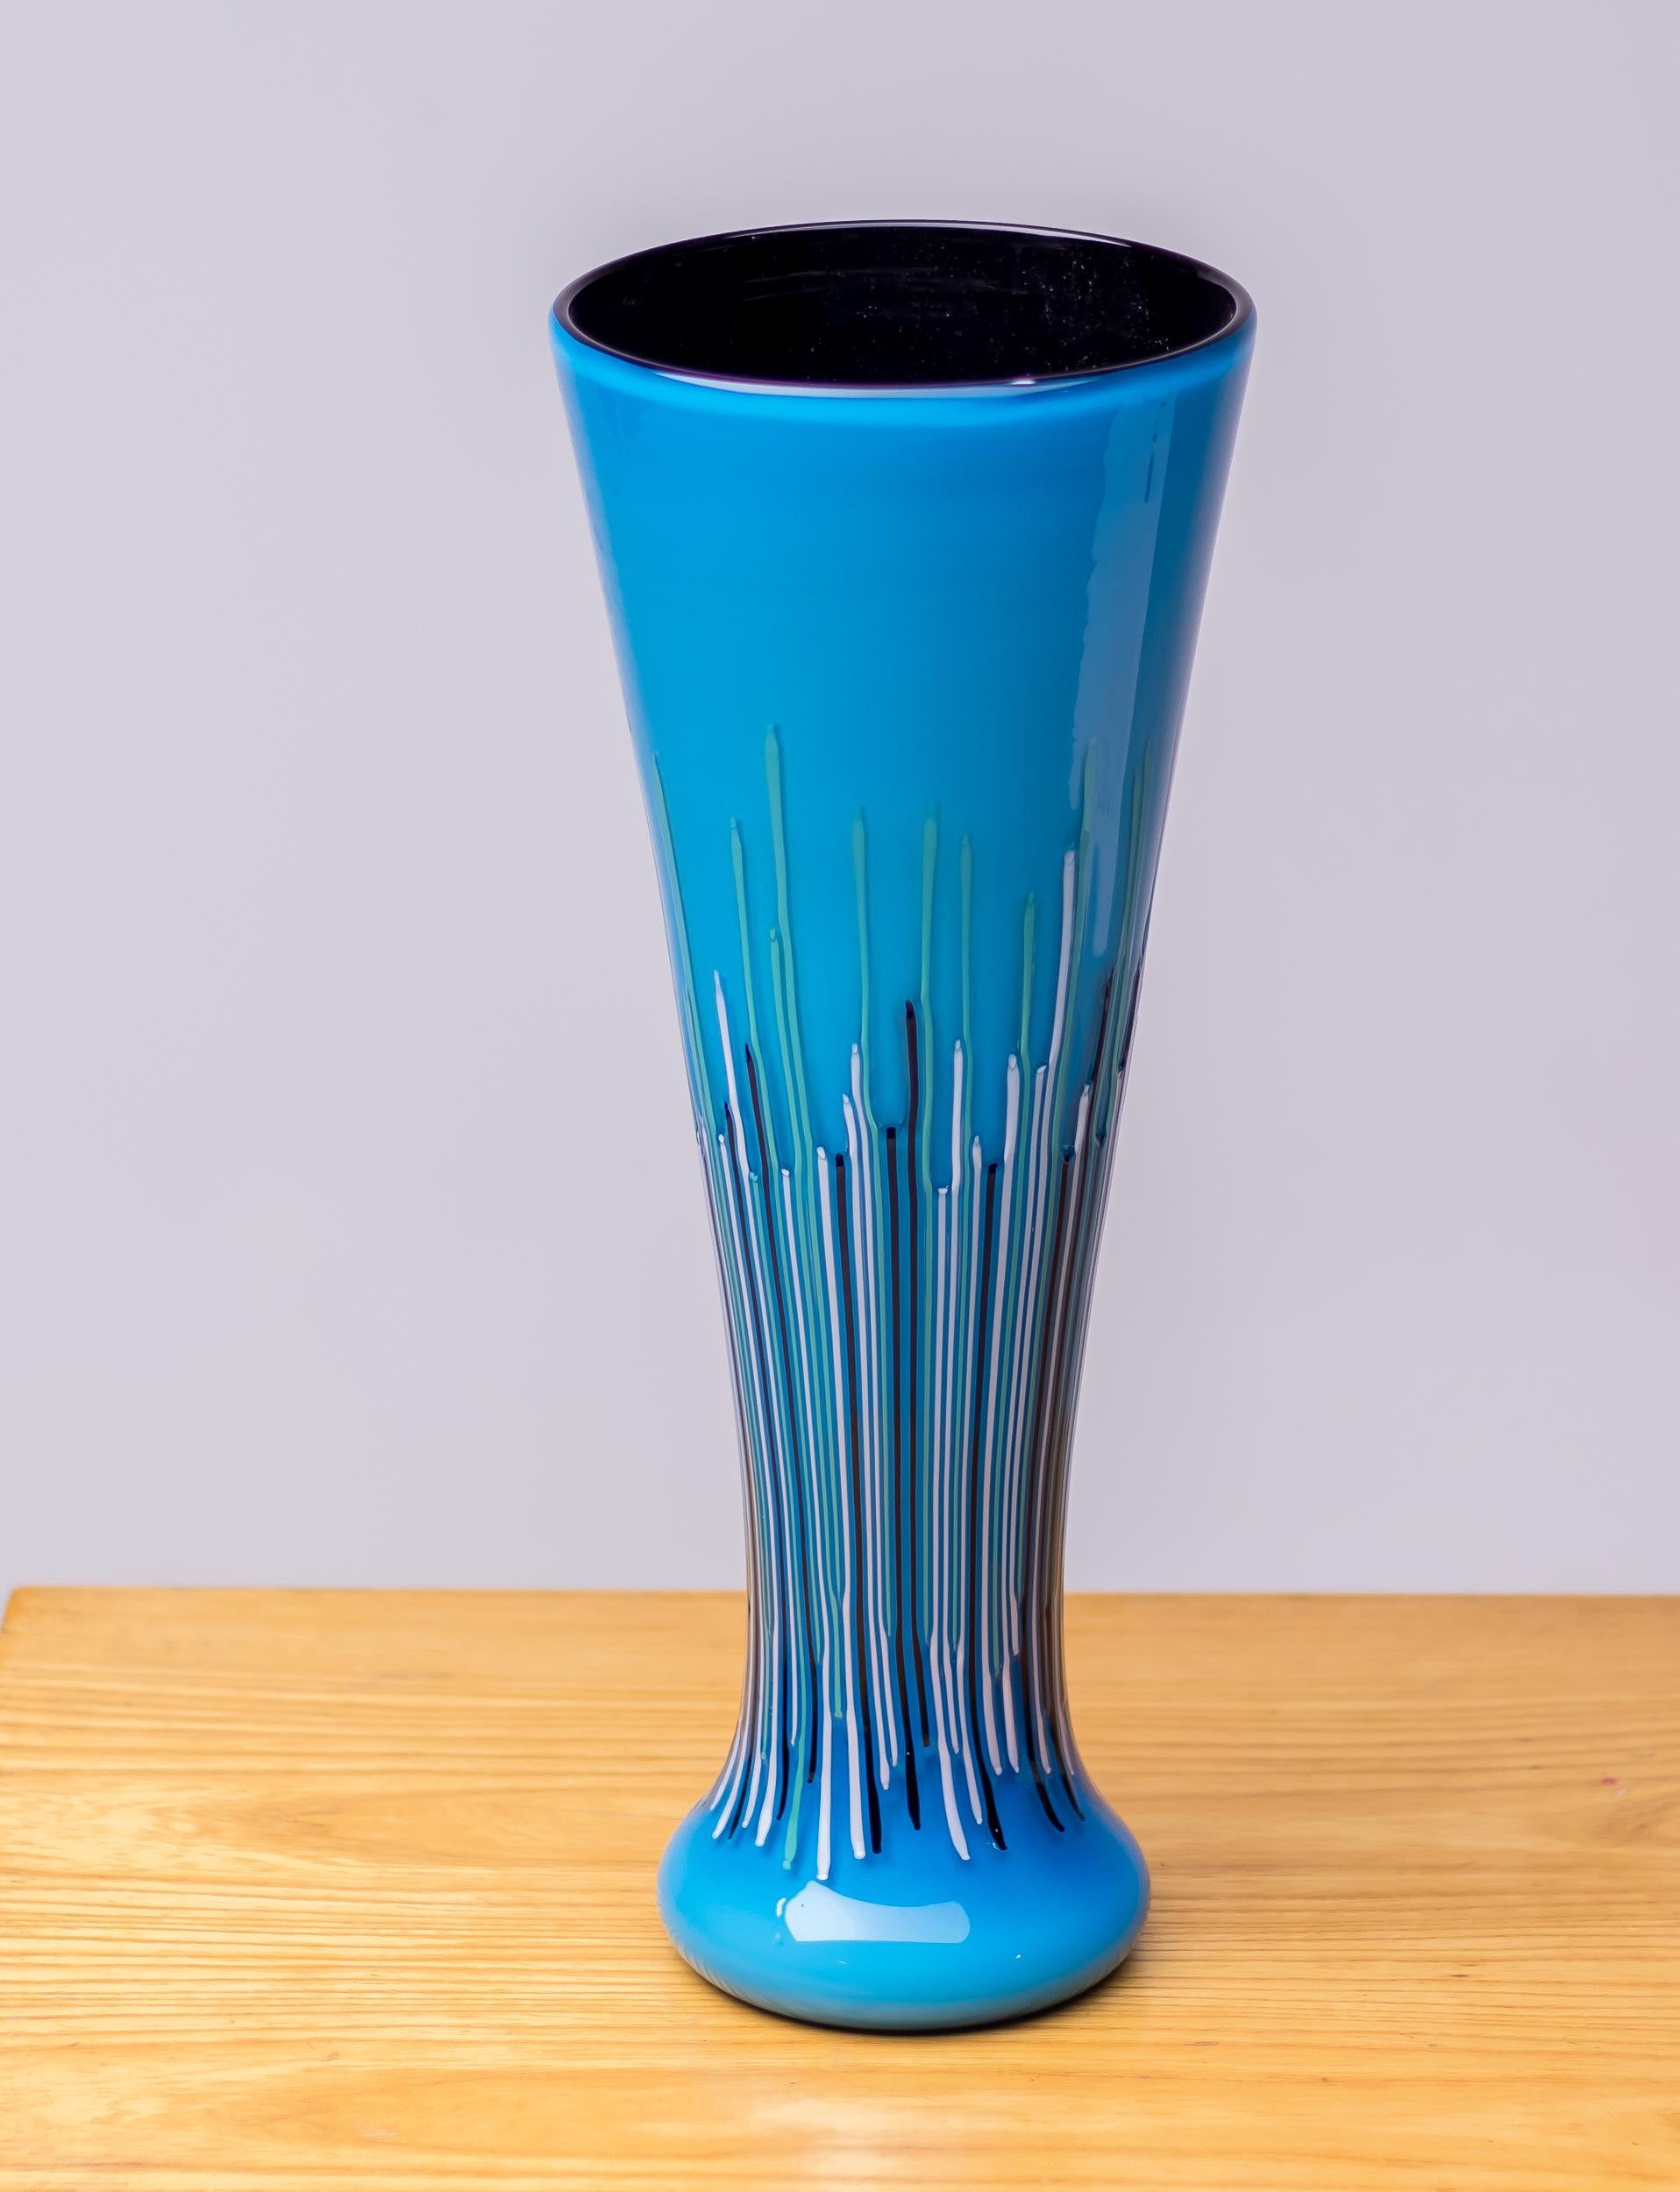 Exquisite and rare Rivoli vase designed by Gianni Versace for Venini Murano. 
Numbered and limited edition.
Marked with Venini label and inscribed at the base.

Gianni Versace, an Italian fashion icon born in 1946, revolutionized the industry with